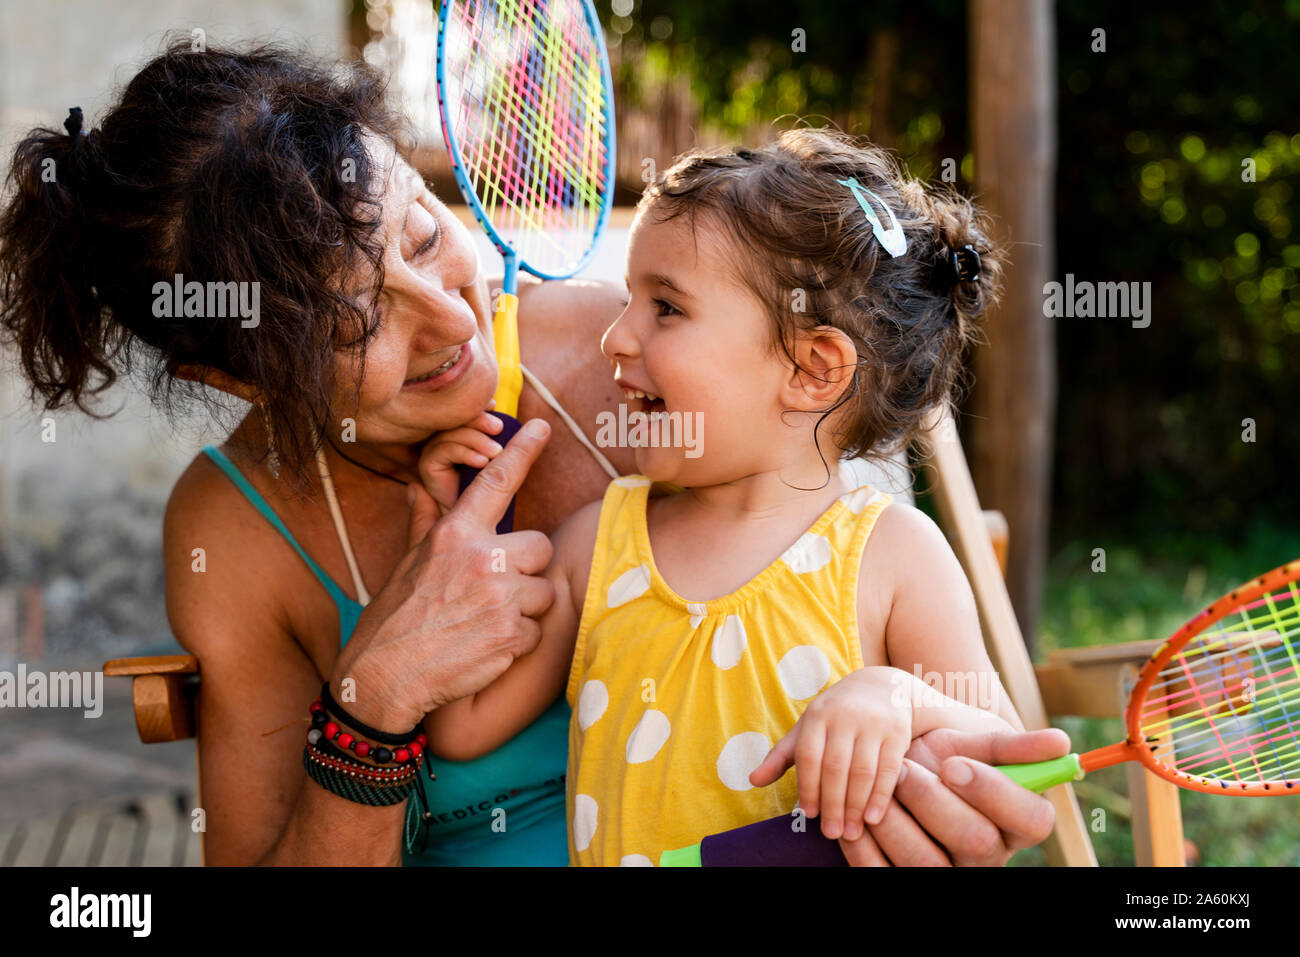 Grandmother playing with little girl and badminton rackets outdoors Stock Photo